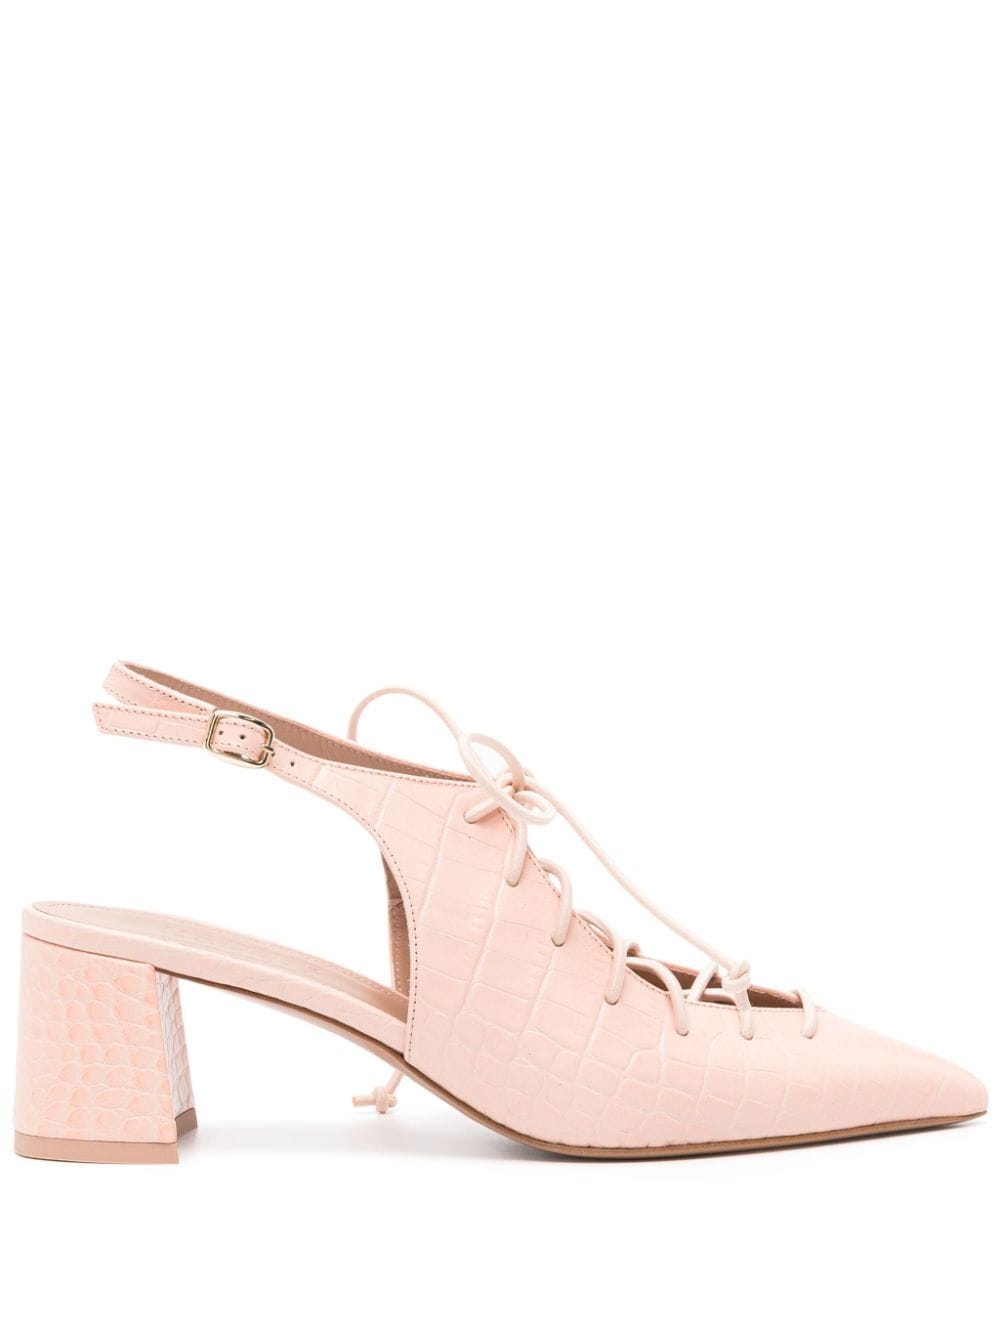 Malone Souliers Alessa 45mm Leather Pumps In Pink